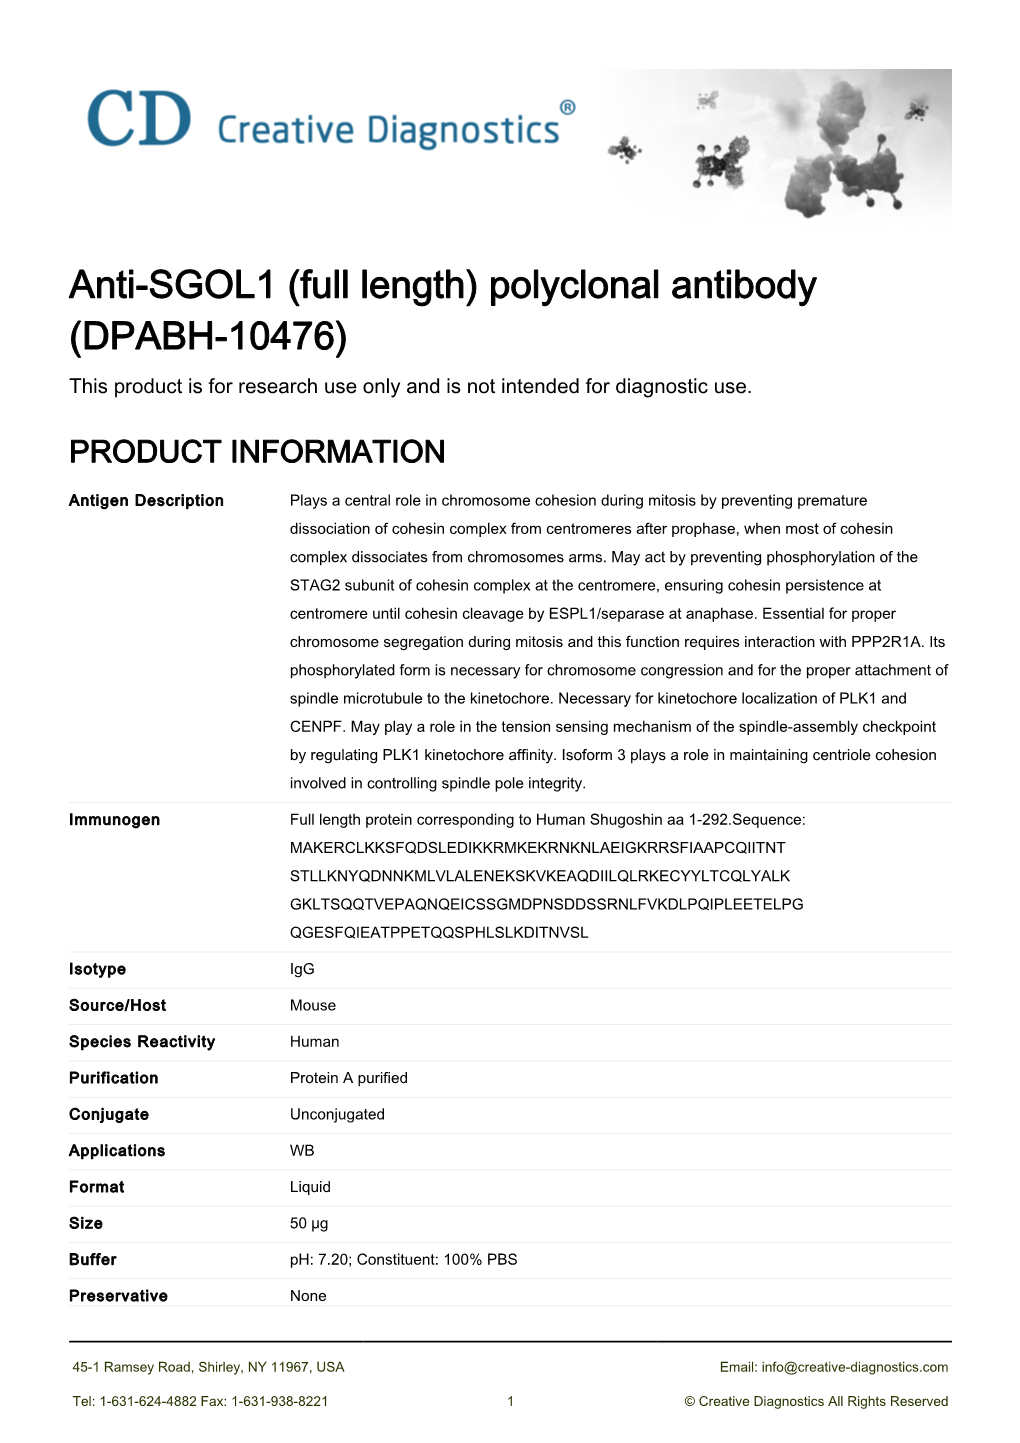 Anti-SGOL1 (Full Length) Polyclonal Antibody (DPABH-10476) This Product Is for Research Use Only and Is Not Intended for Diagnostic Use